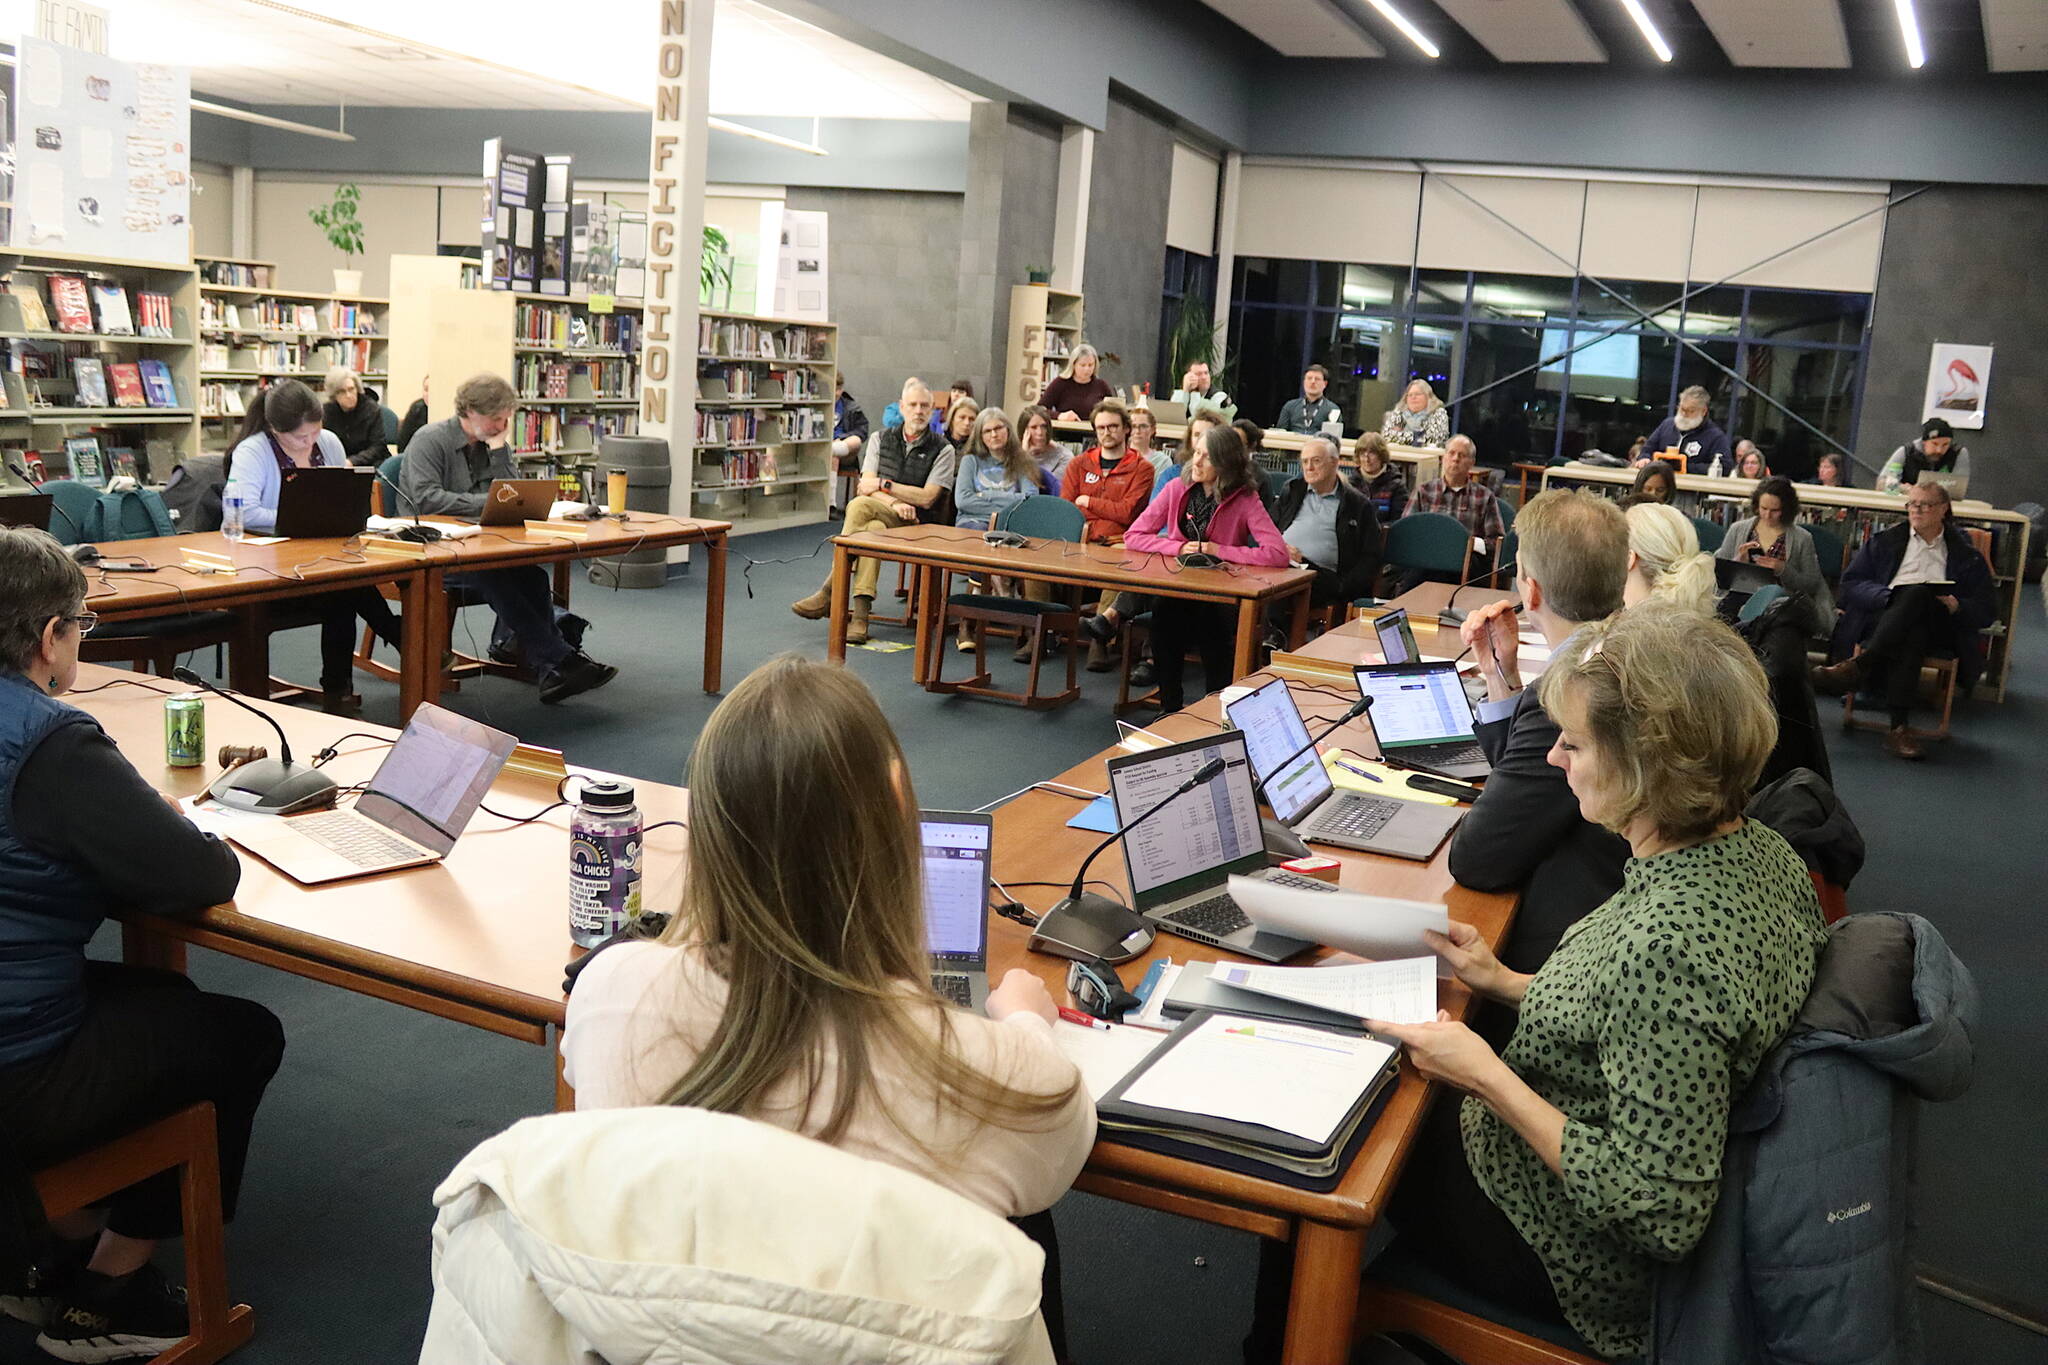 Juneau School District administrators and school board members discuss the district’s proposed budget for next year during a special meeting Thursday at Thunder Mountain High School. (Mark Sabbatini / Juneau Empire)